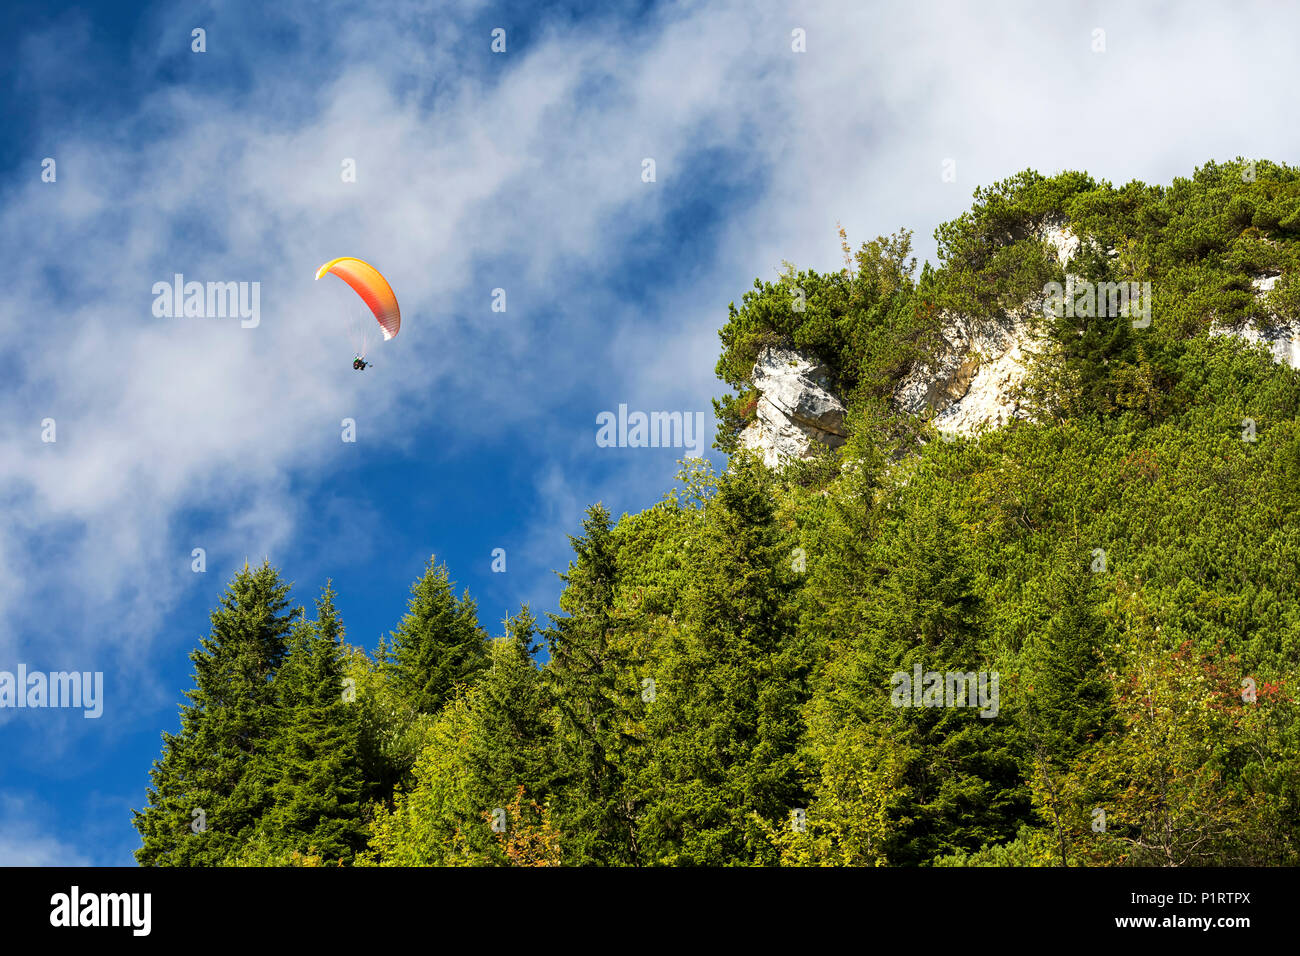 Paraglider flying over tree covered cliff with bue sky and clouds; Grainau, Bavaria, Germany Stock Photo